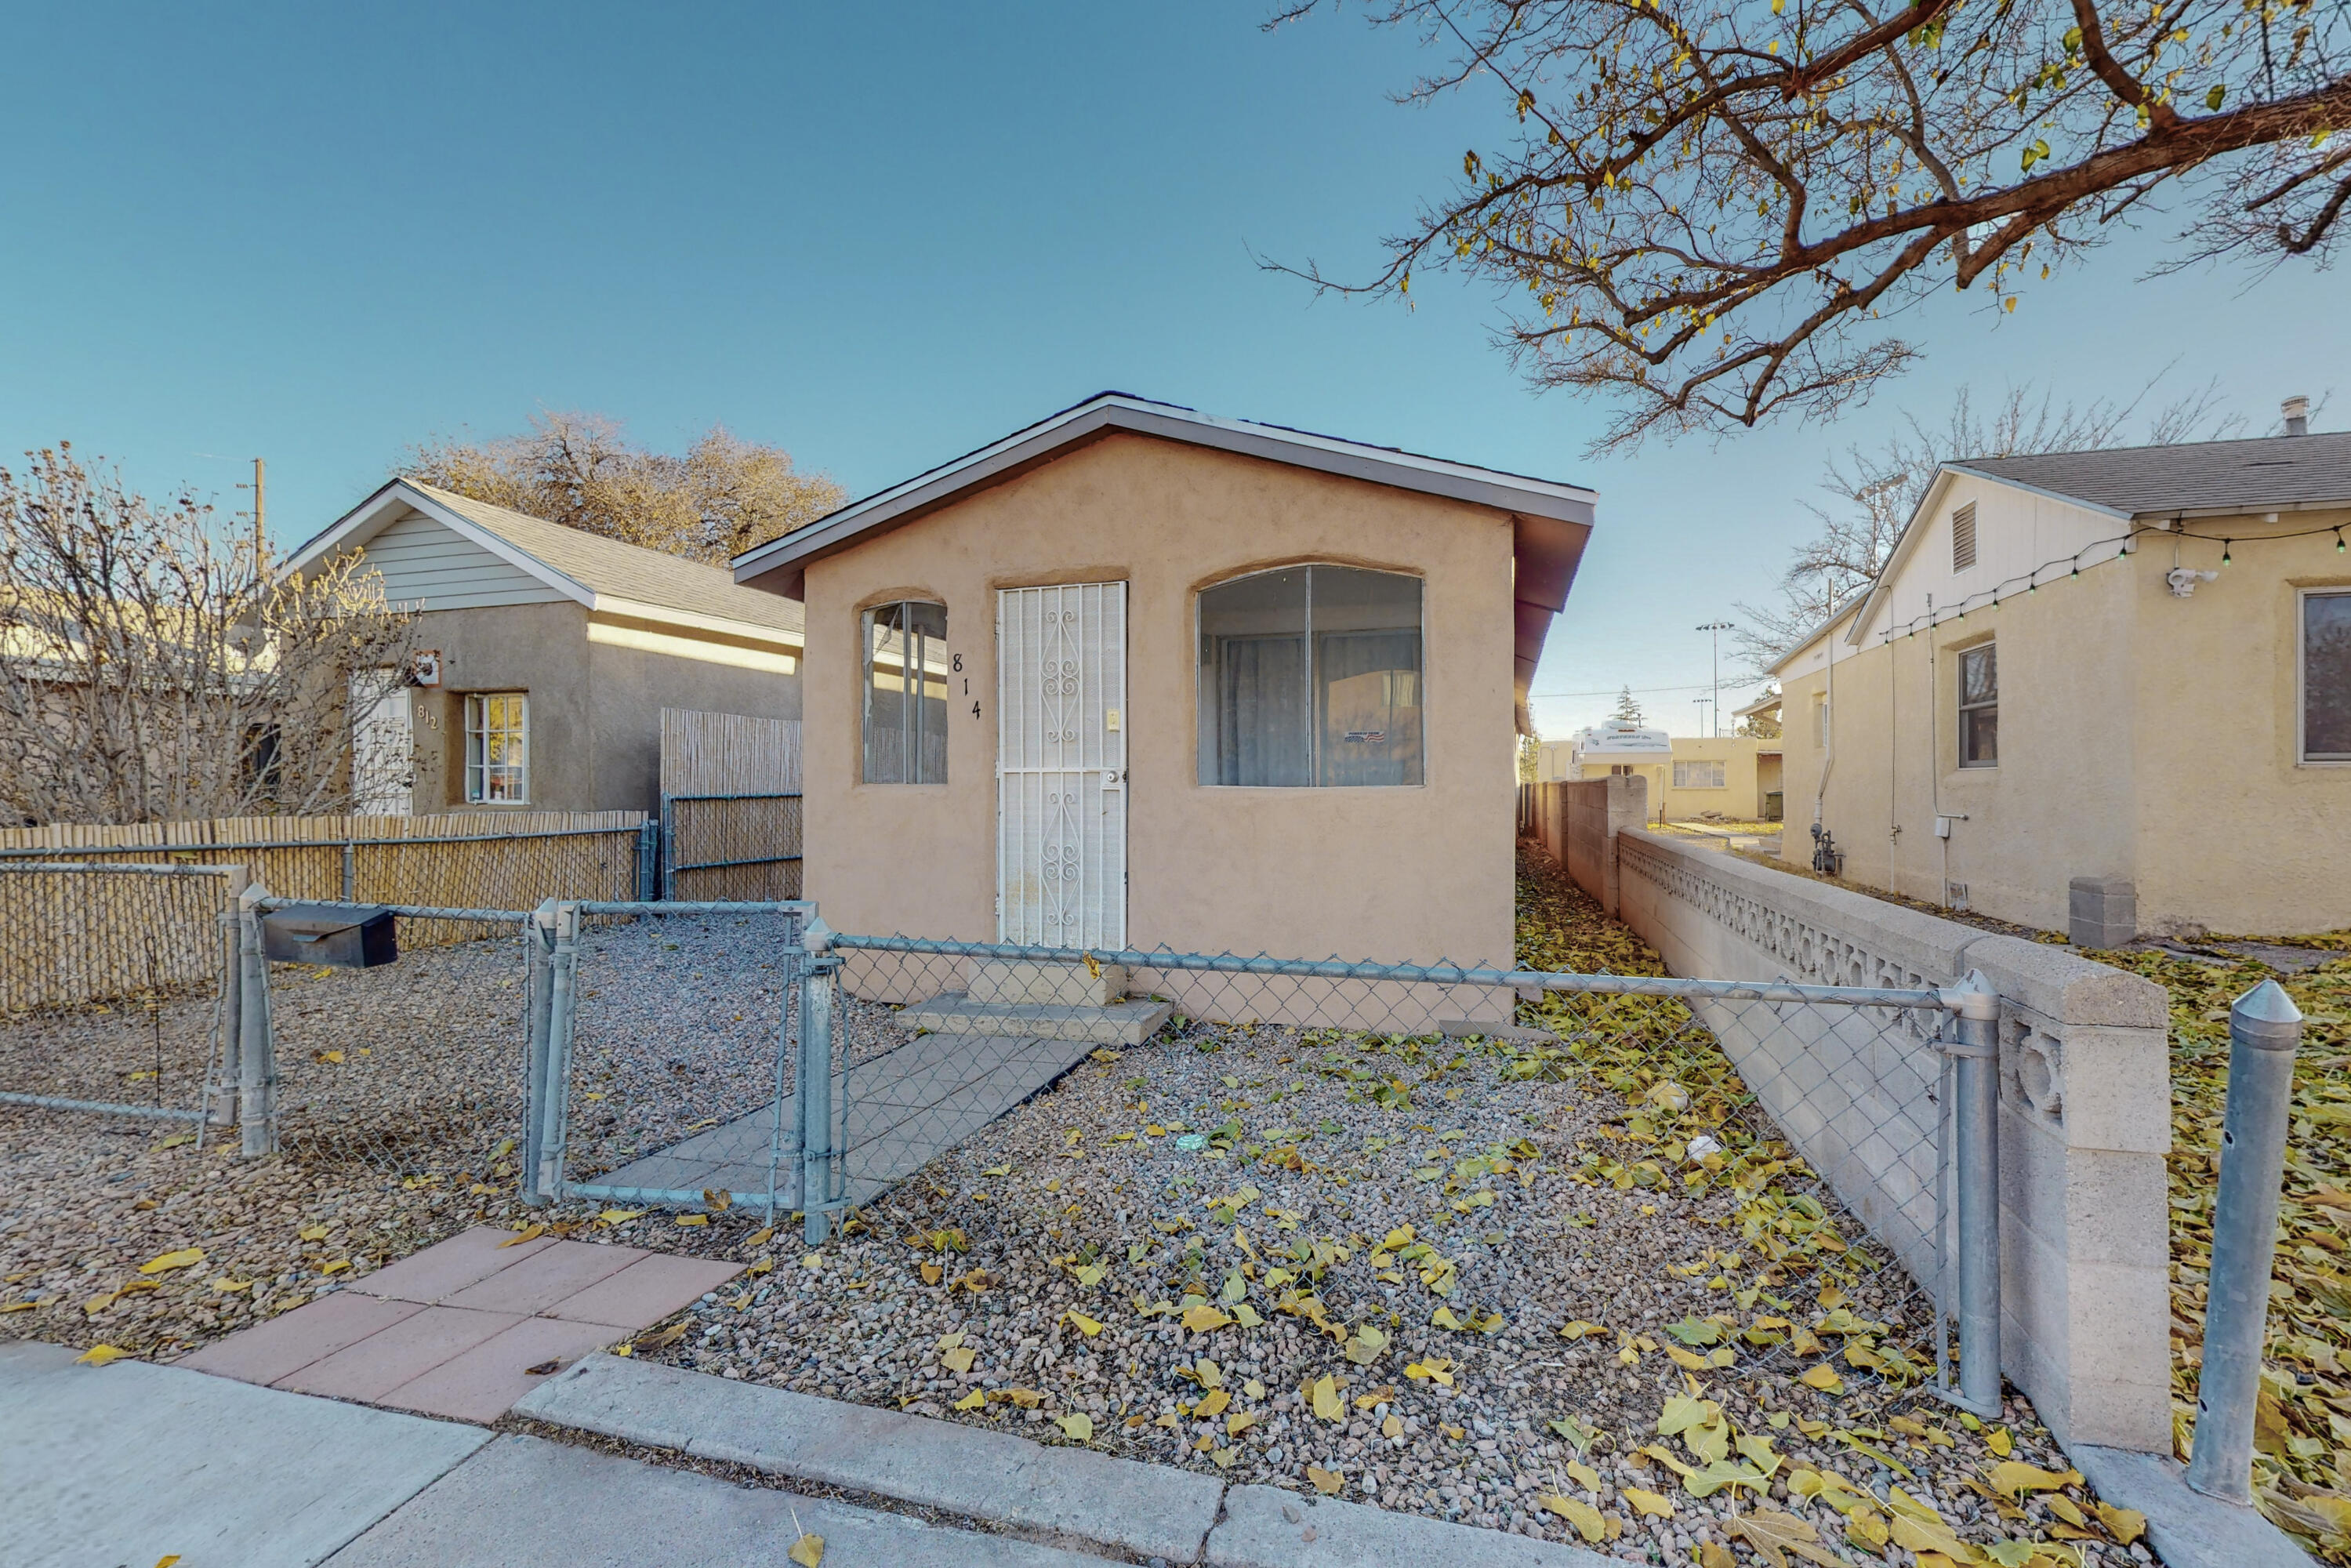 Hurry! Must see Downtown location close to ABQ Bio Park and the Zoo! Darling two-bedroom one bath home! The kitchen has been updated! Backyard access and storage sheds! Close distance to downtown and old town. Take a virtual walkthrough tour or schedule a private showing today!